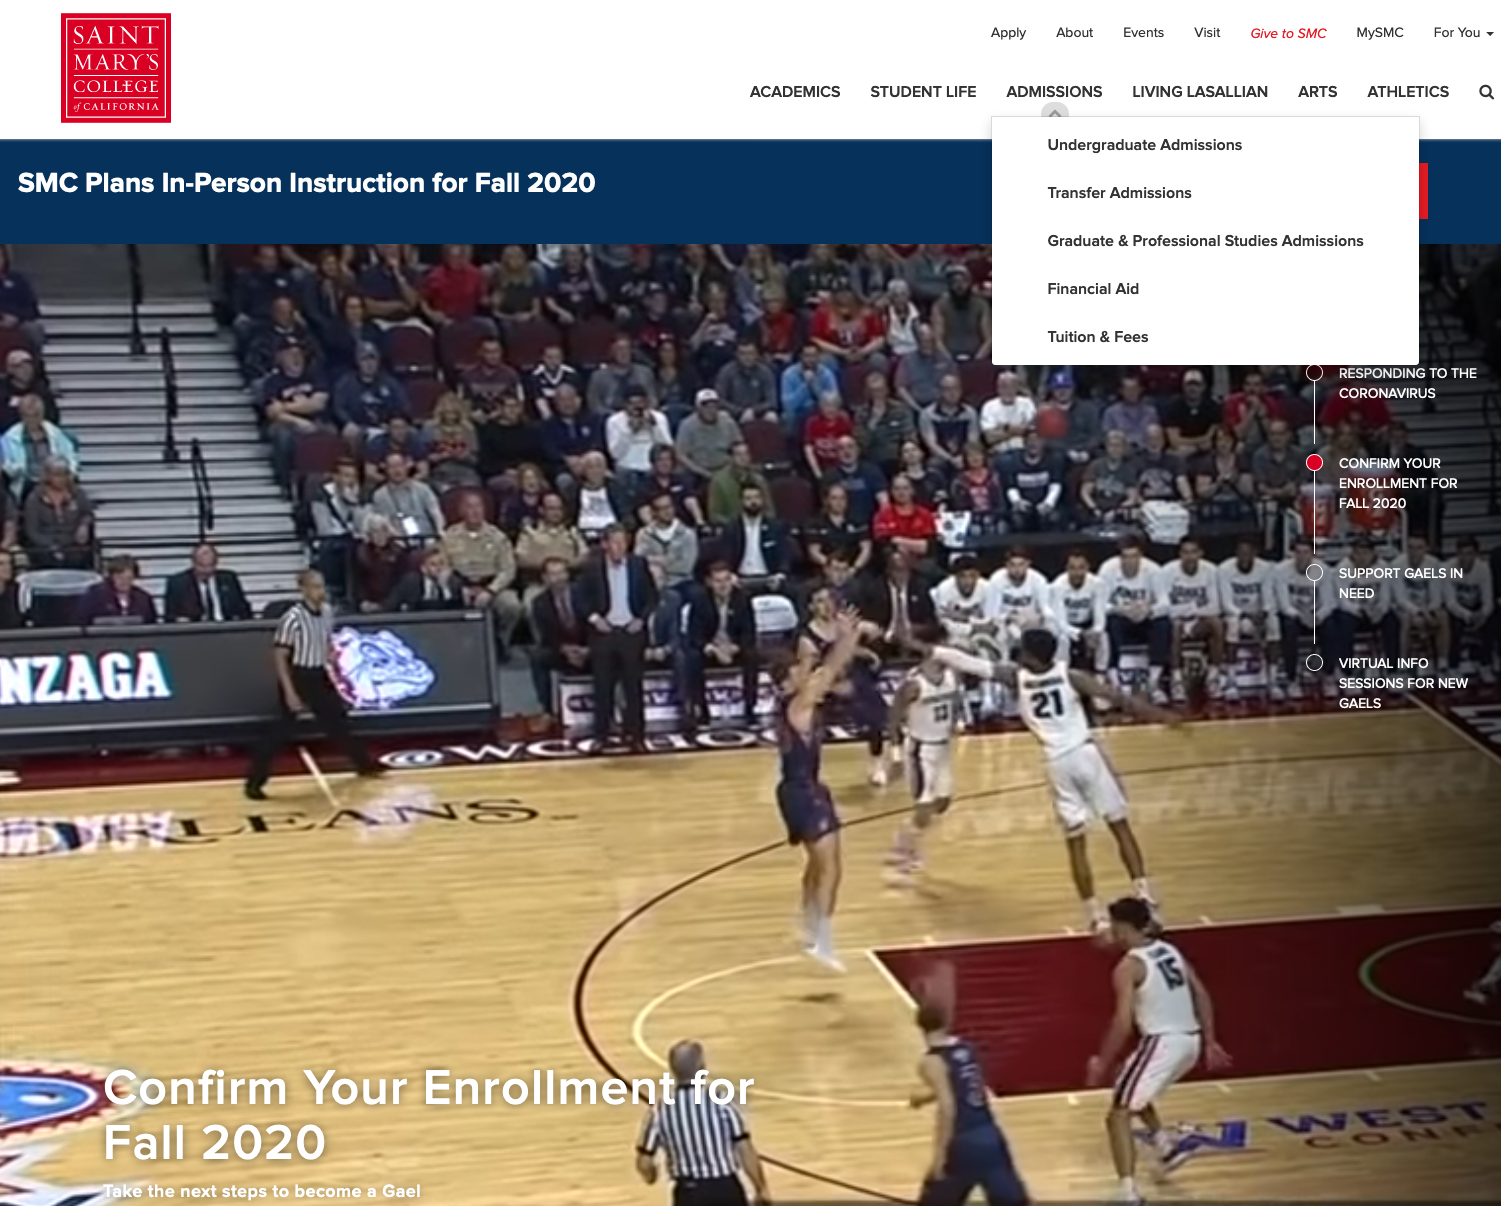 Screen shot of St. Mary's home page, featuring full screen basketball video and a dropdown menu